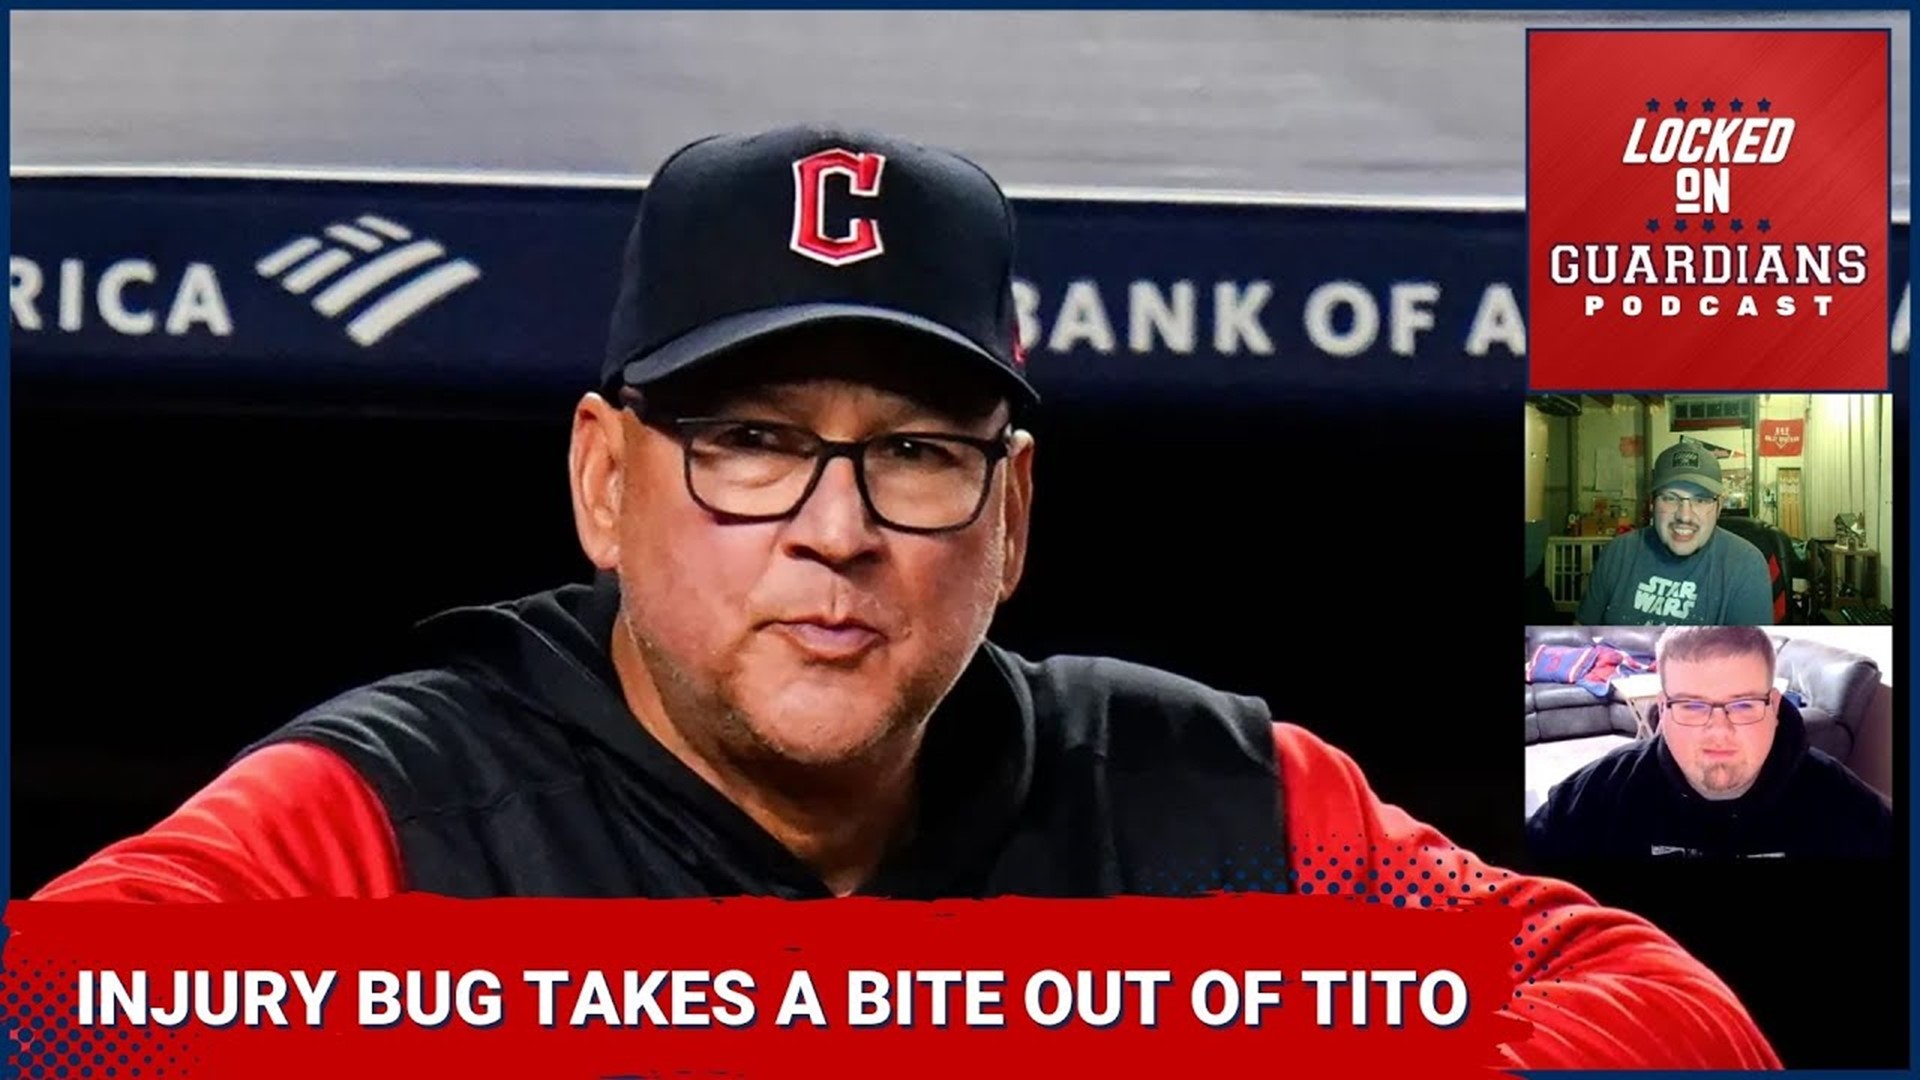 The Cleveland Guardians spring training injury bug takes a bite out of Terry Francona. We discuss that and lots more in today’s edition of Locked On Guardians.